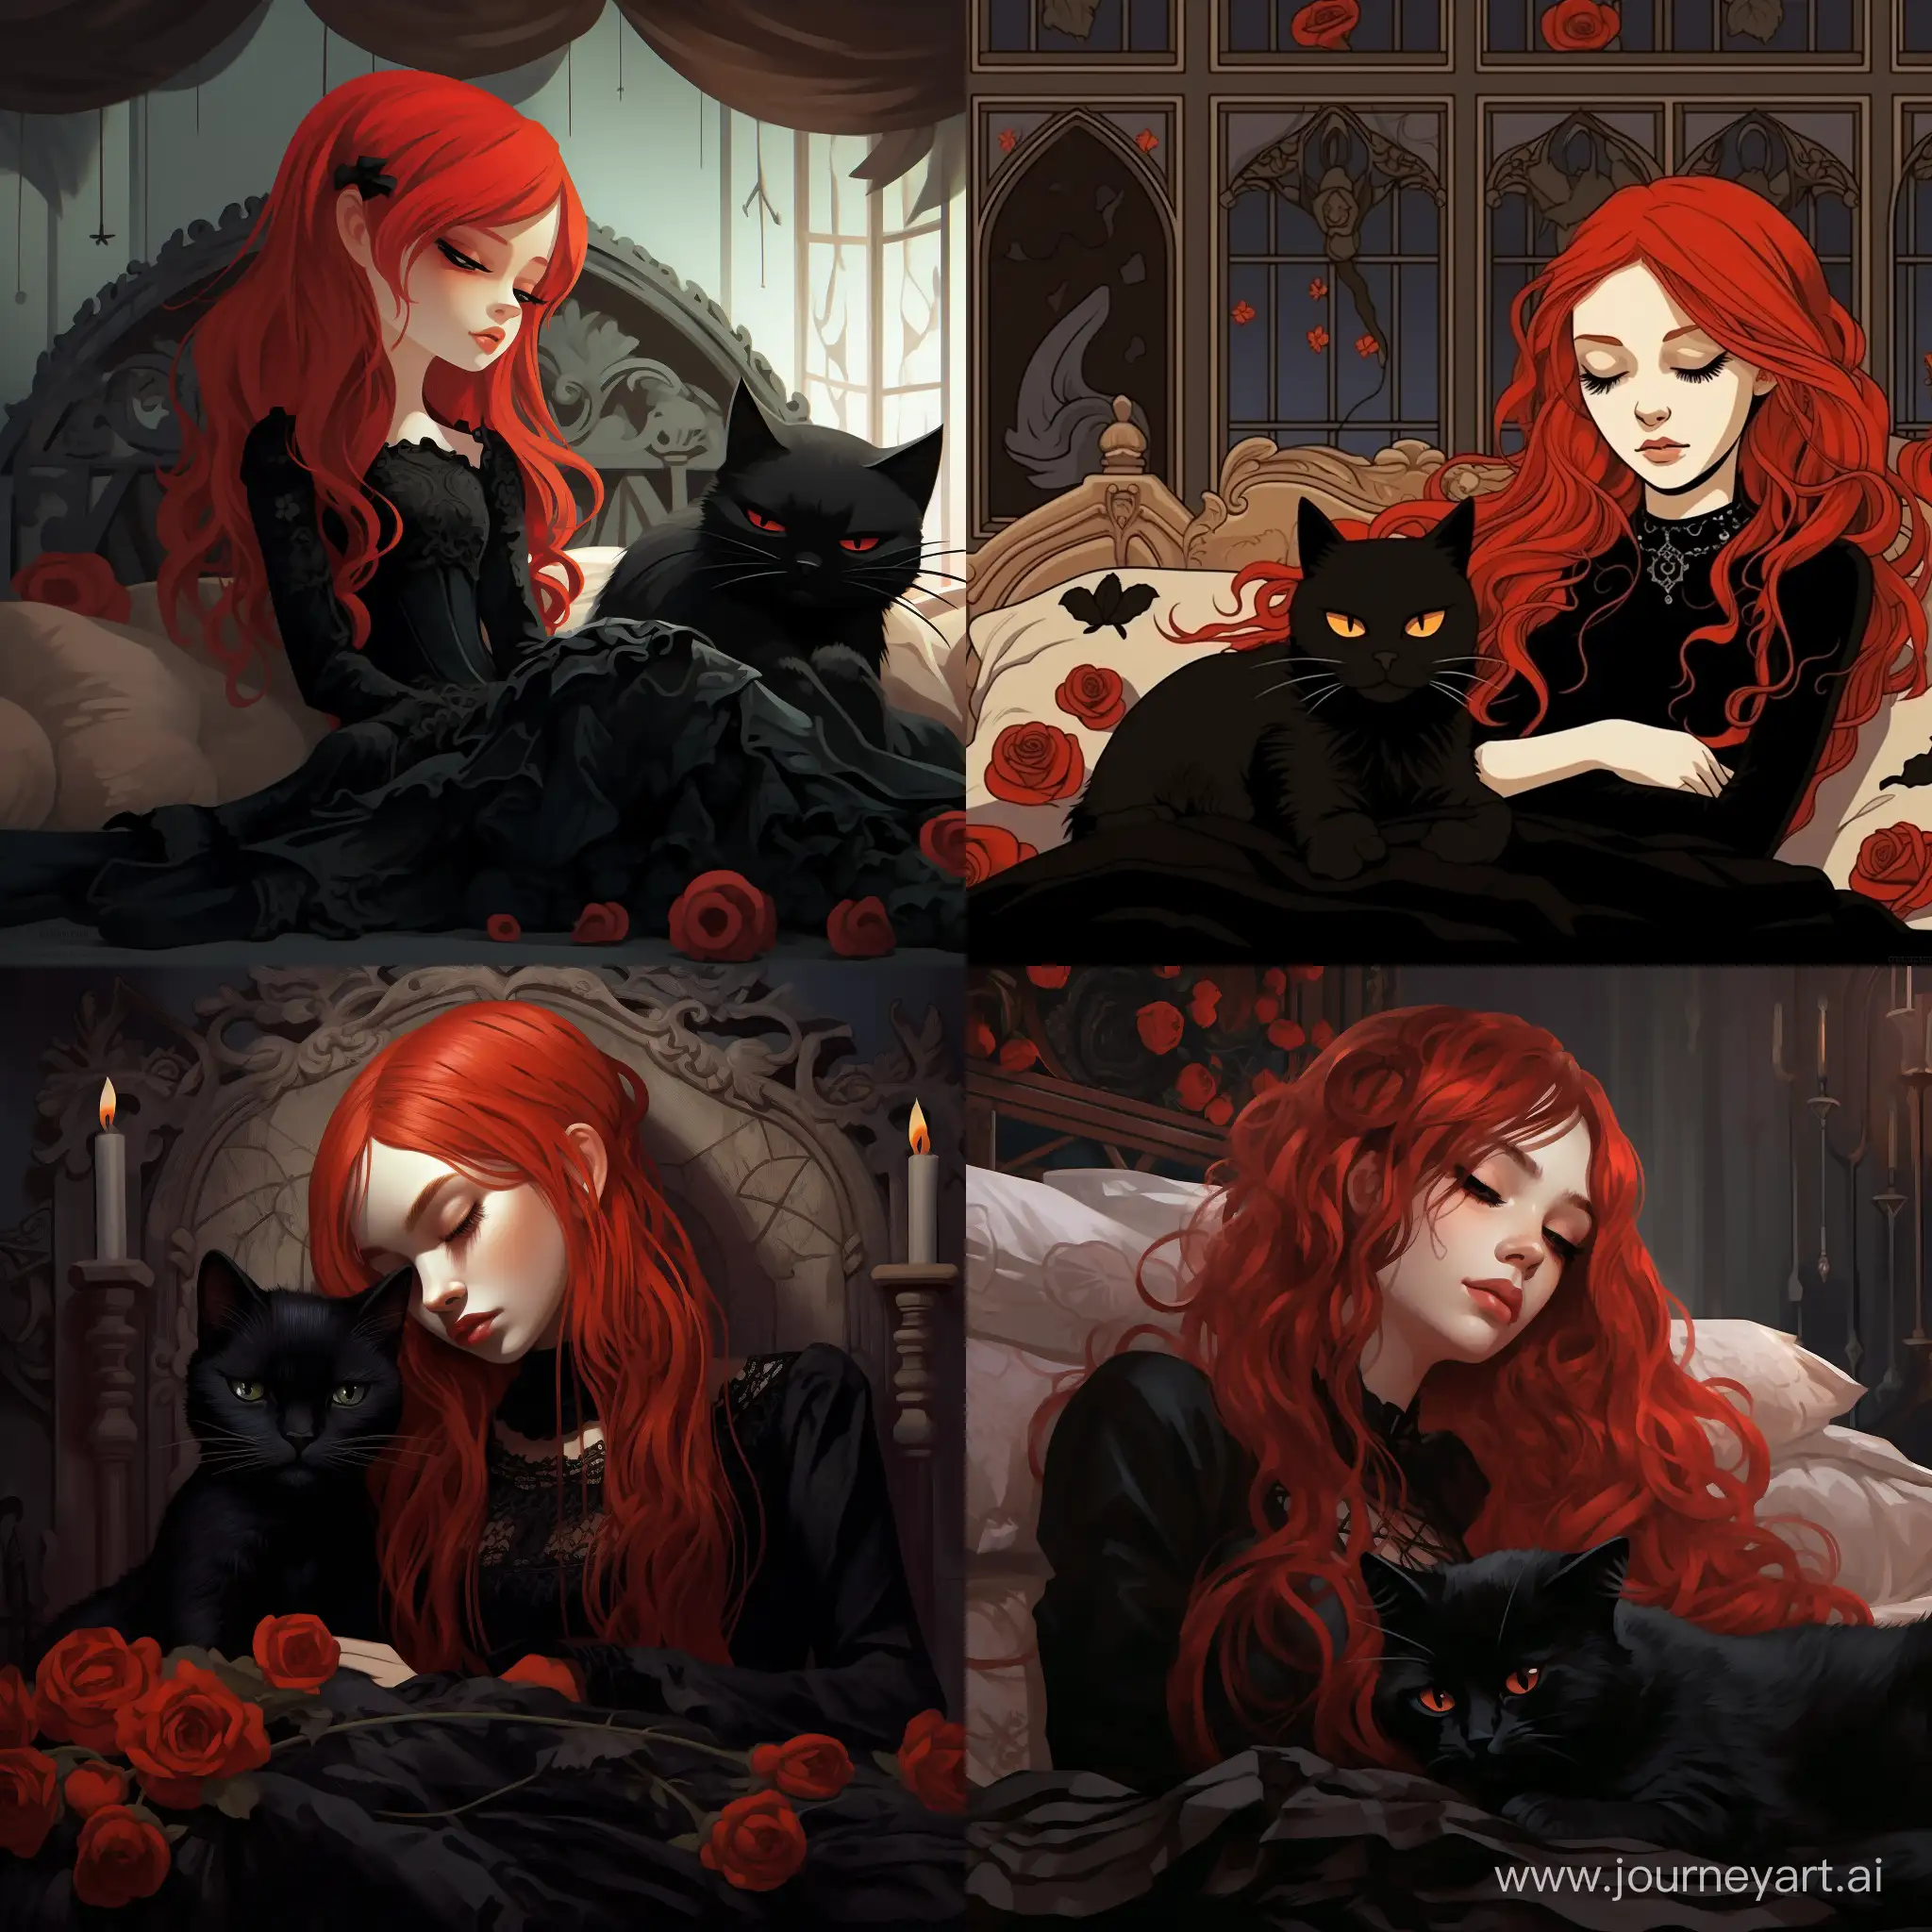 RedHaired-Gothic-Girl-Sleeping-Next-to-Stylish-Cat